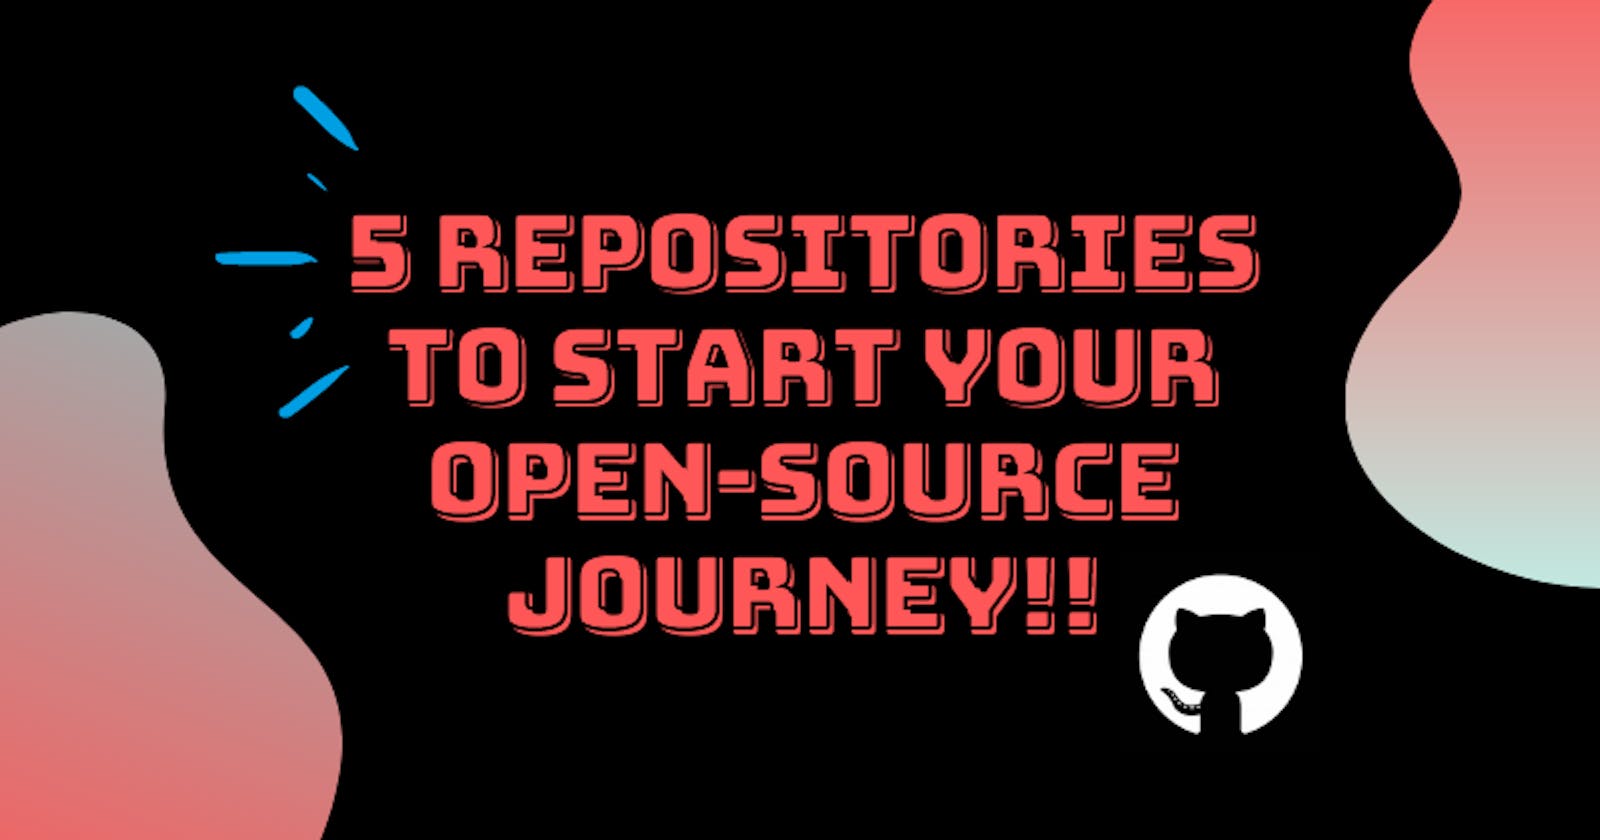 5 Repositories to start your open-source journey!!